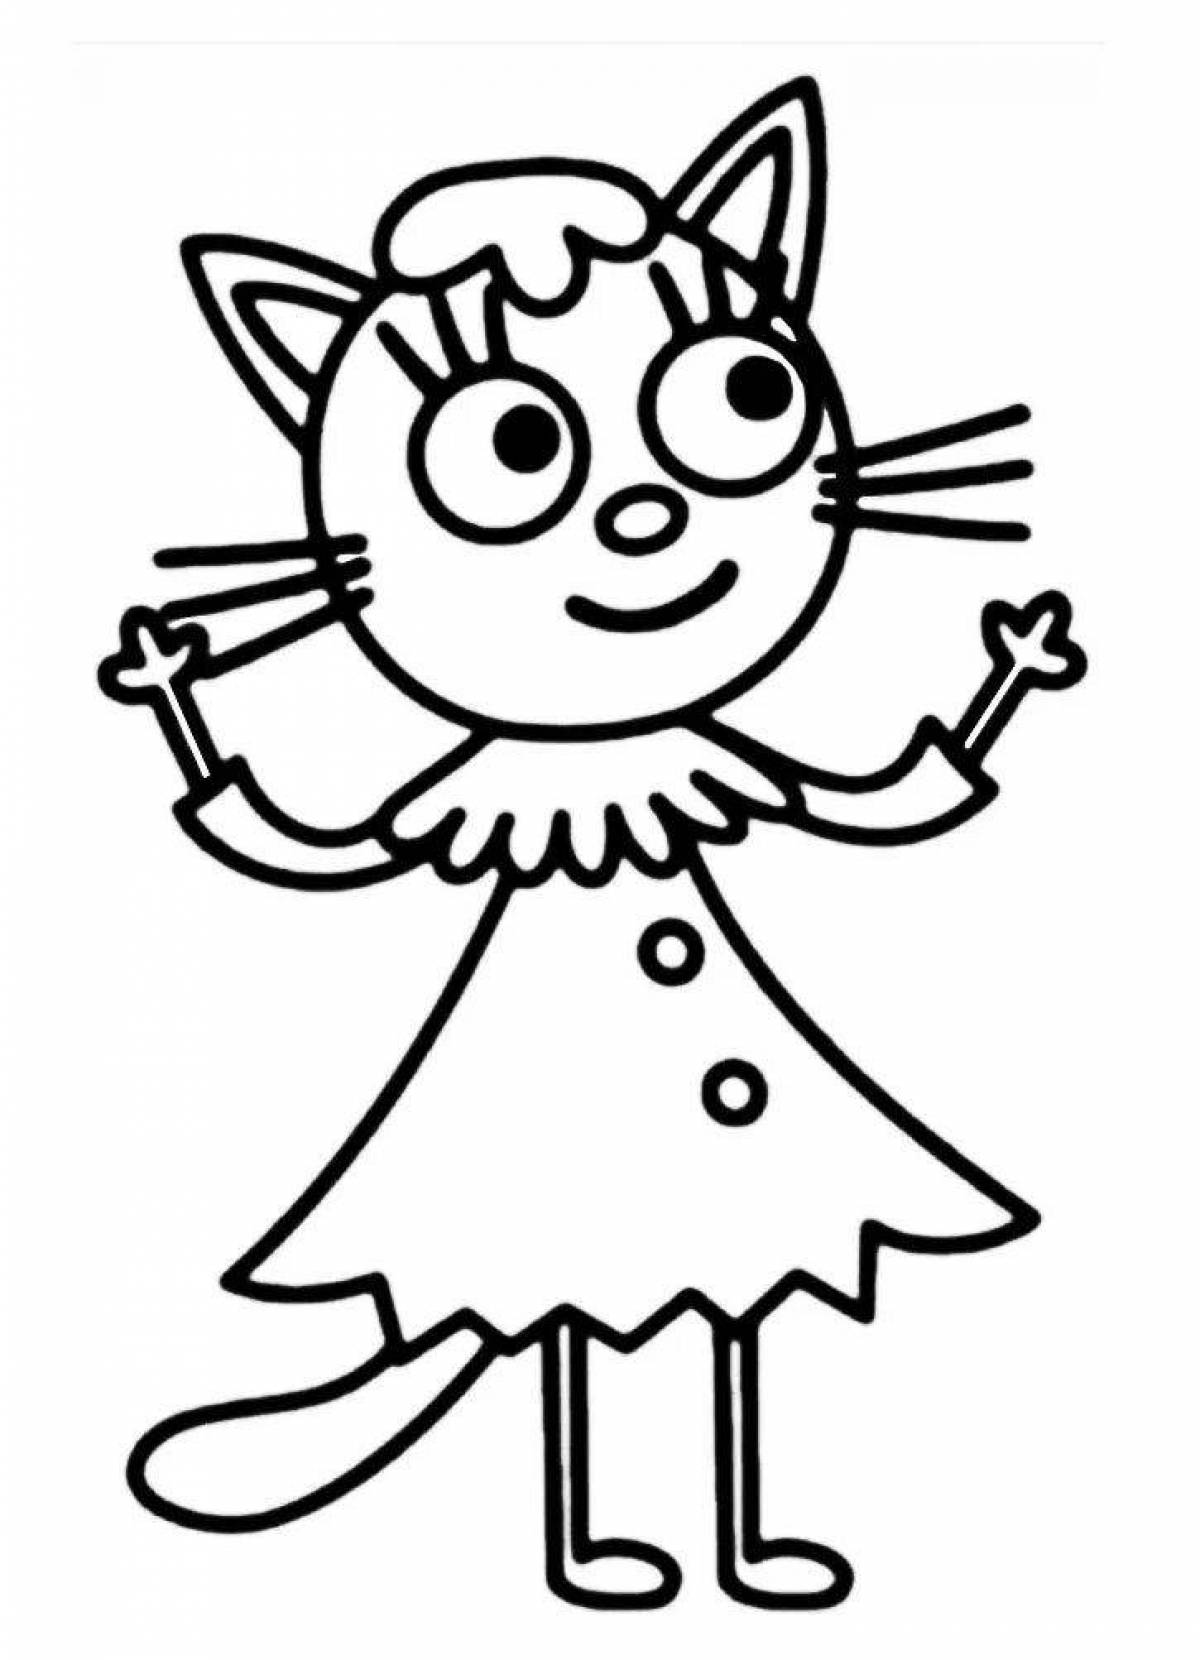 Animated mustard three cats coloring page